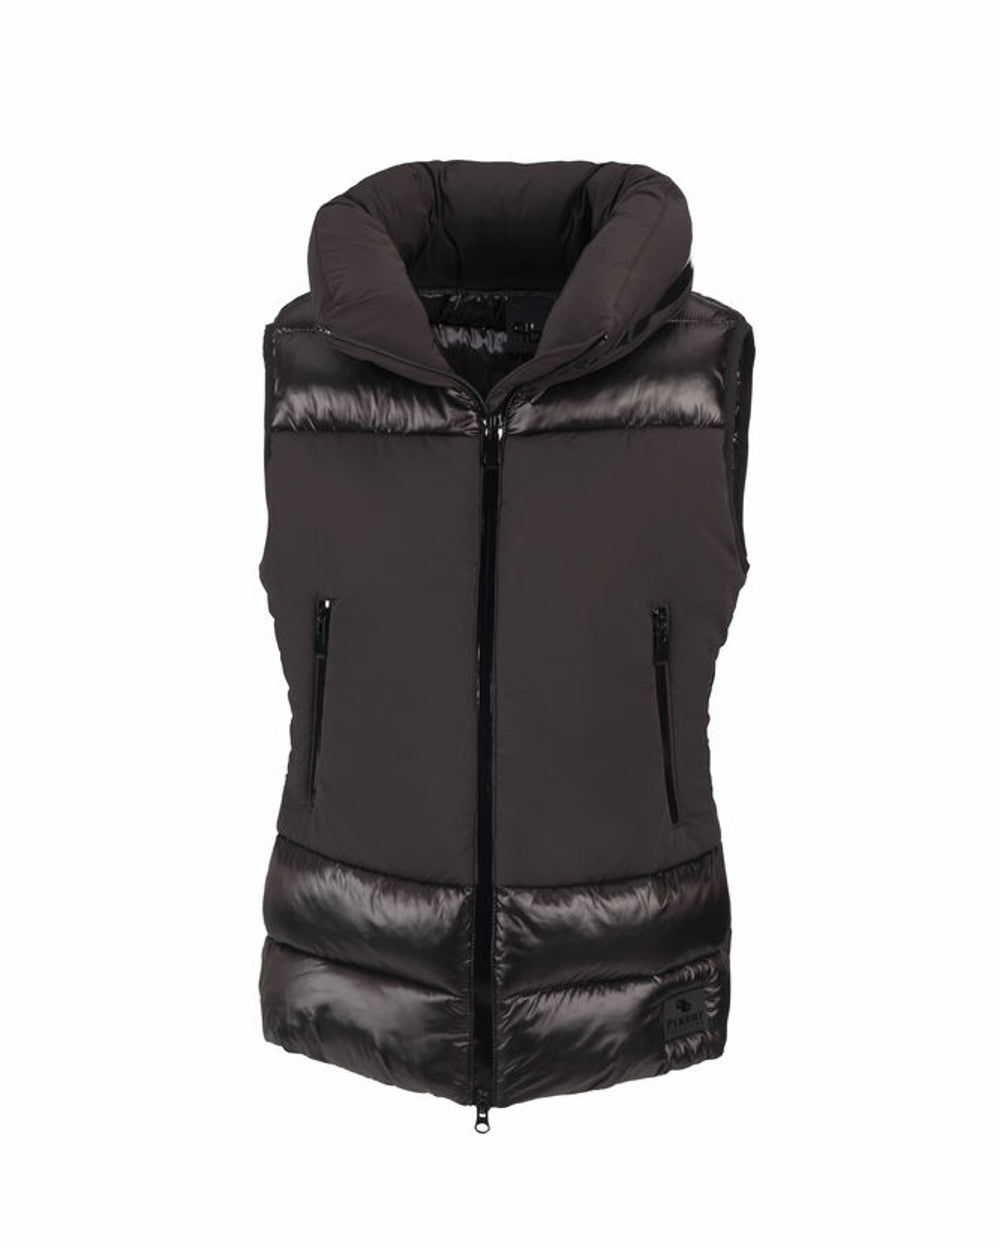 Pikeur Quilted Waistcoat in Licorice 